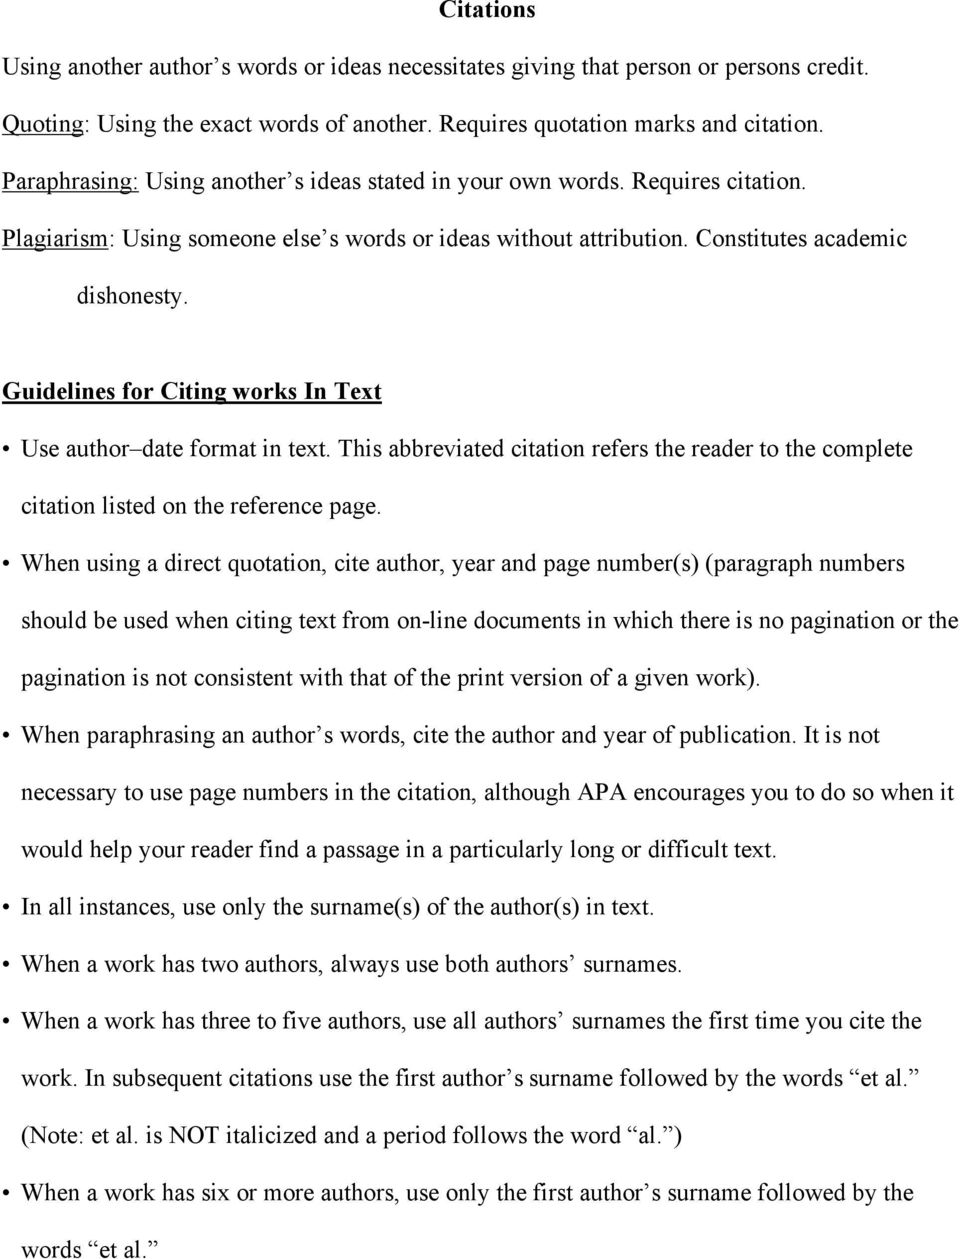 Guidelines for Citing works In Text Use author date format in text. This abbreviated citation refers the reader to the complete citation listed on the reference page.